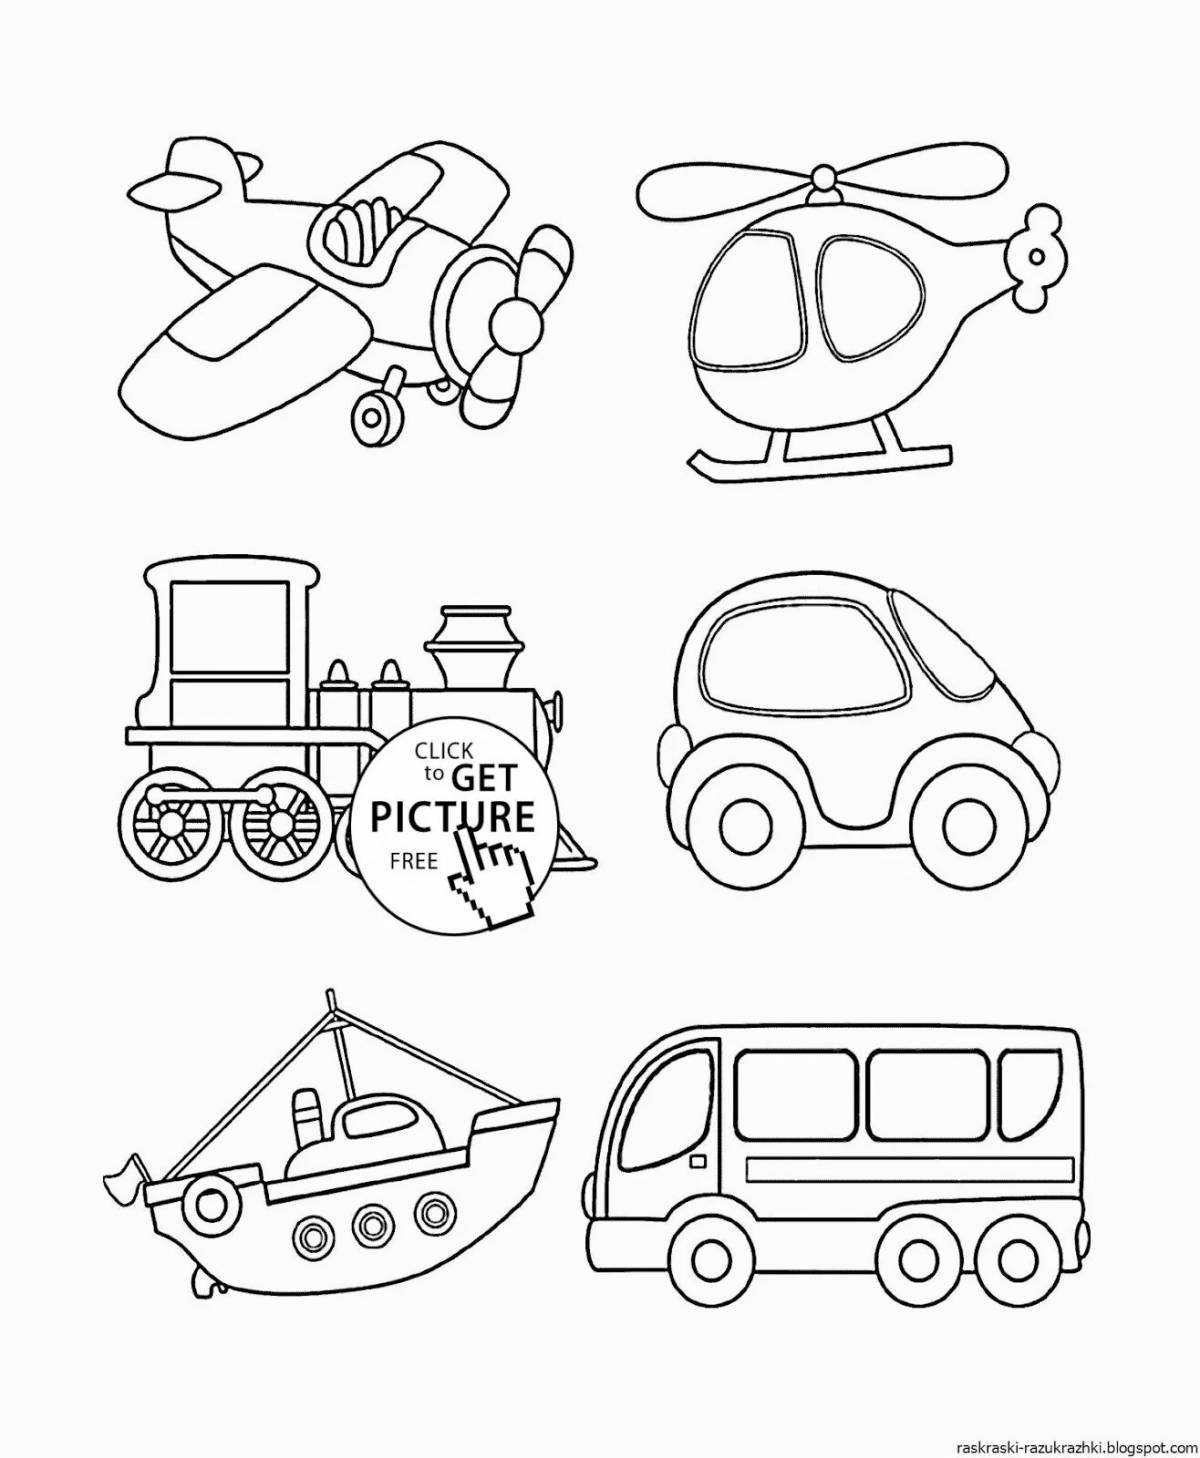 Wonderful special vehicle coloring page